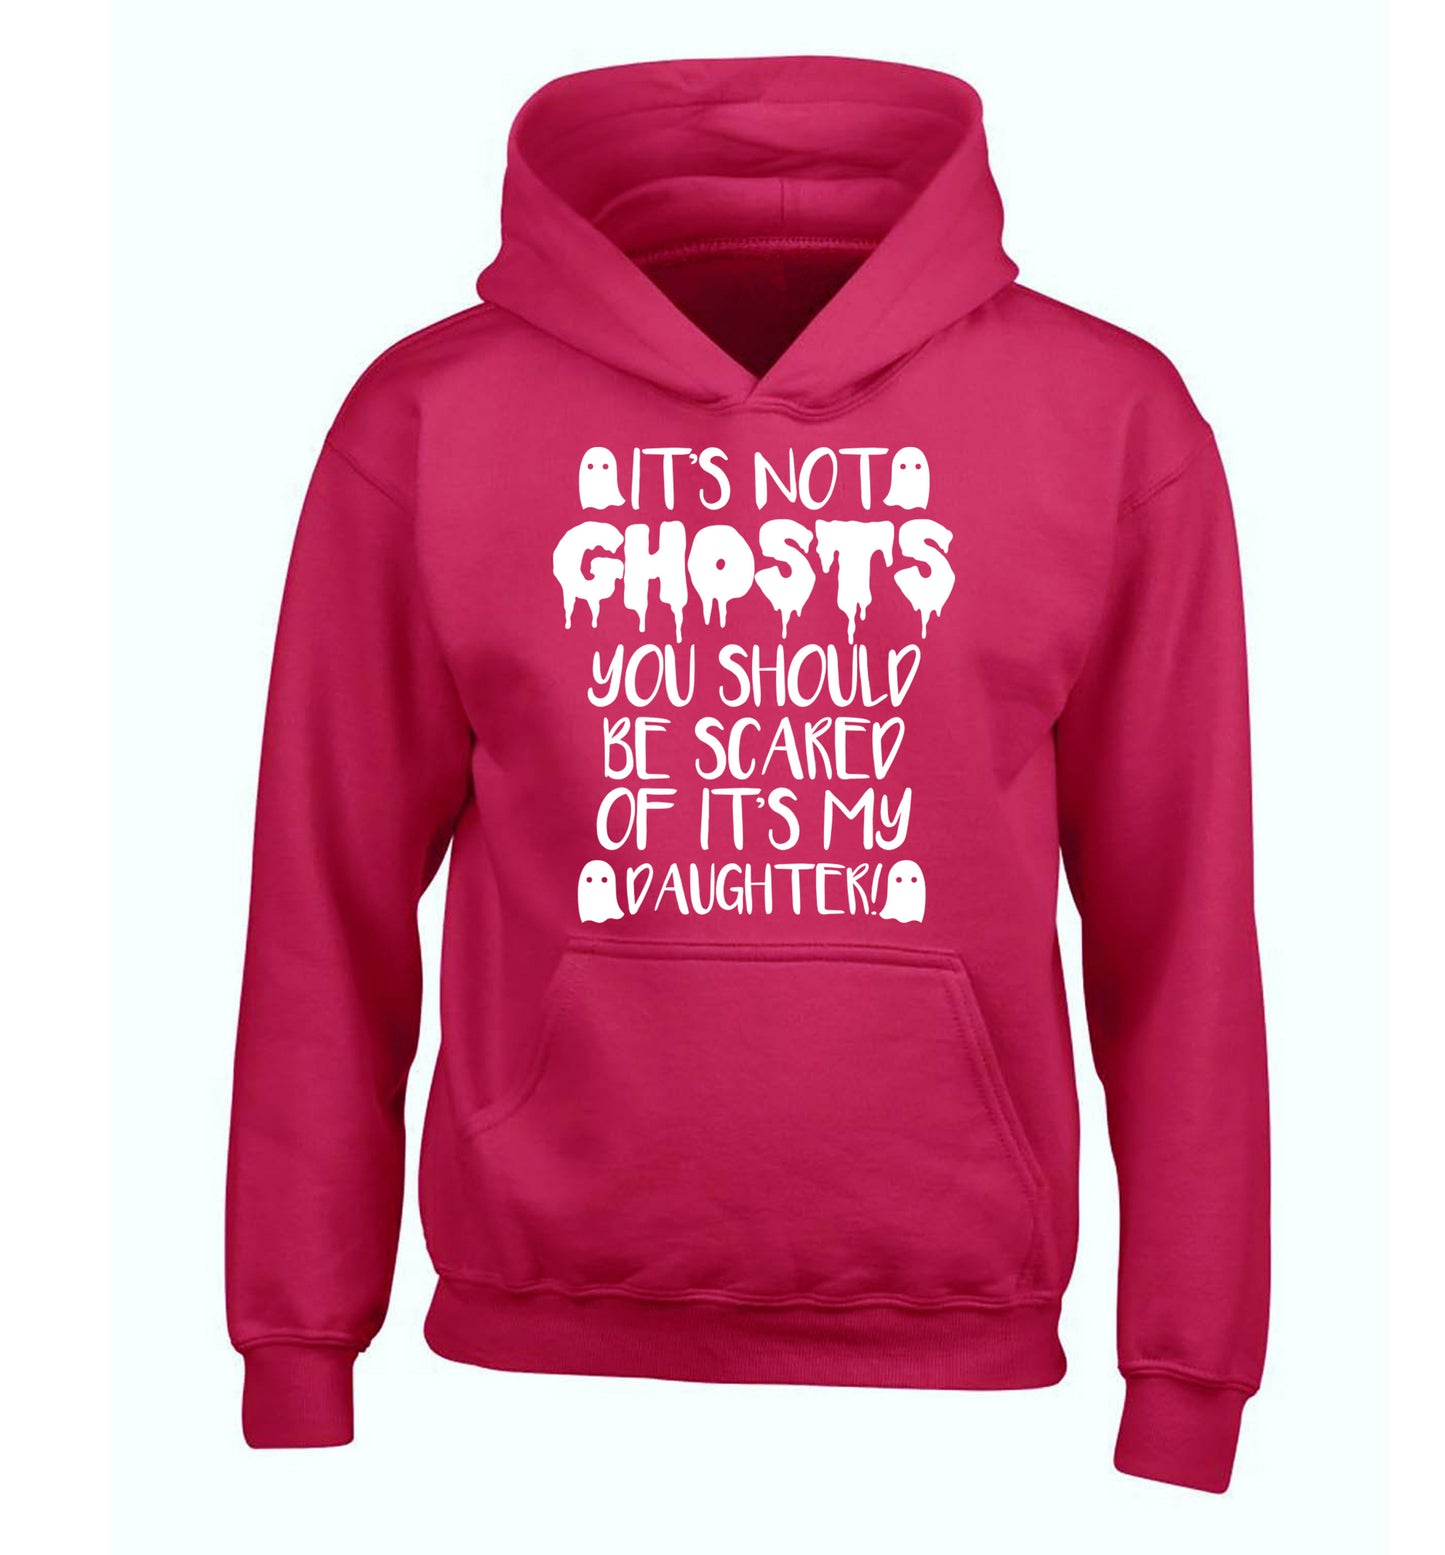 It's not ghosts you should be scared of it's my daughter! children's pink hoodie 12-14 Years